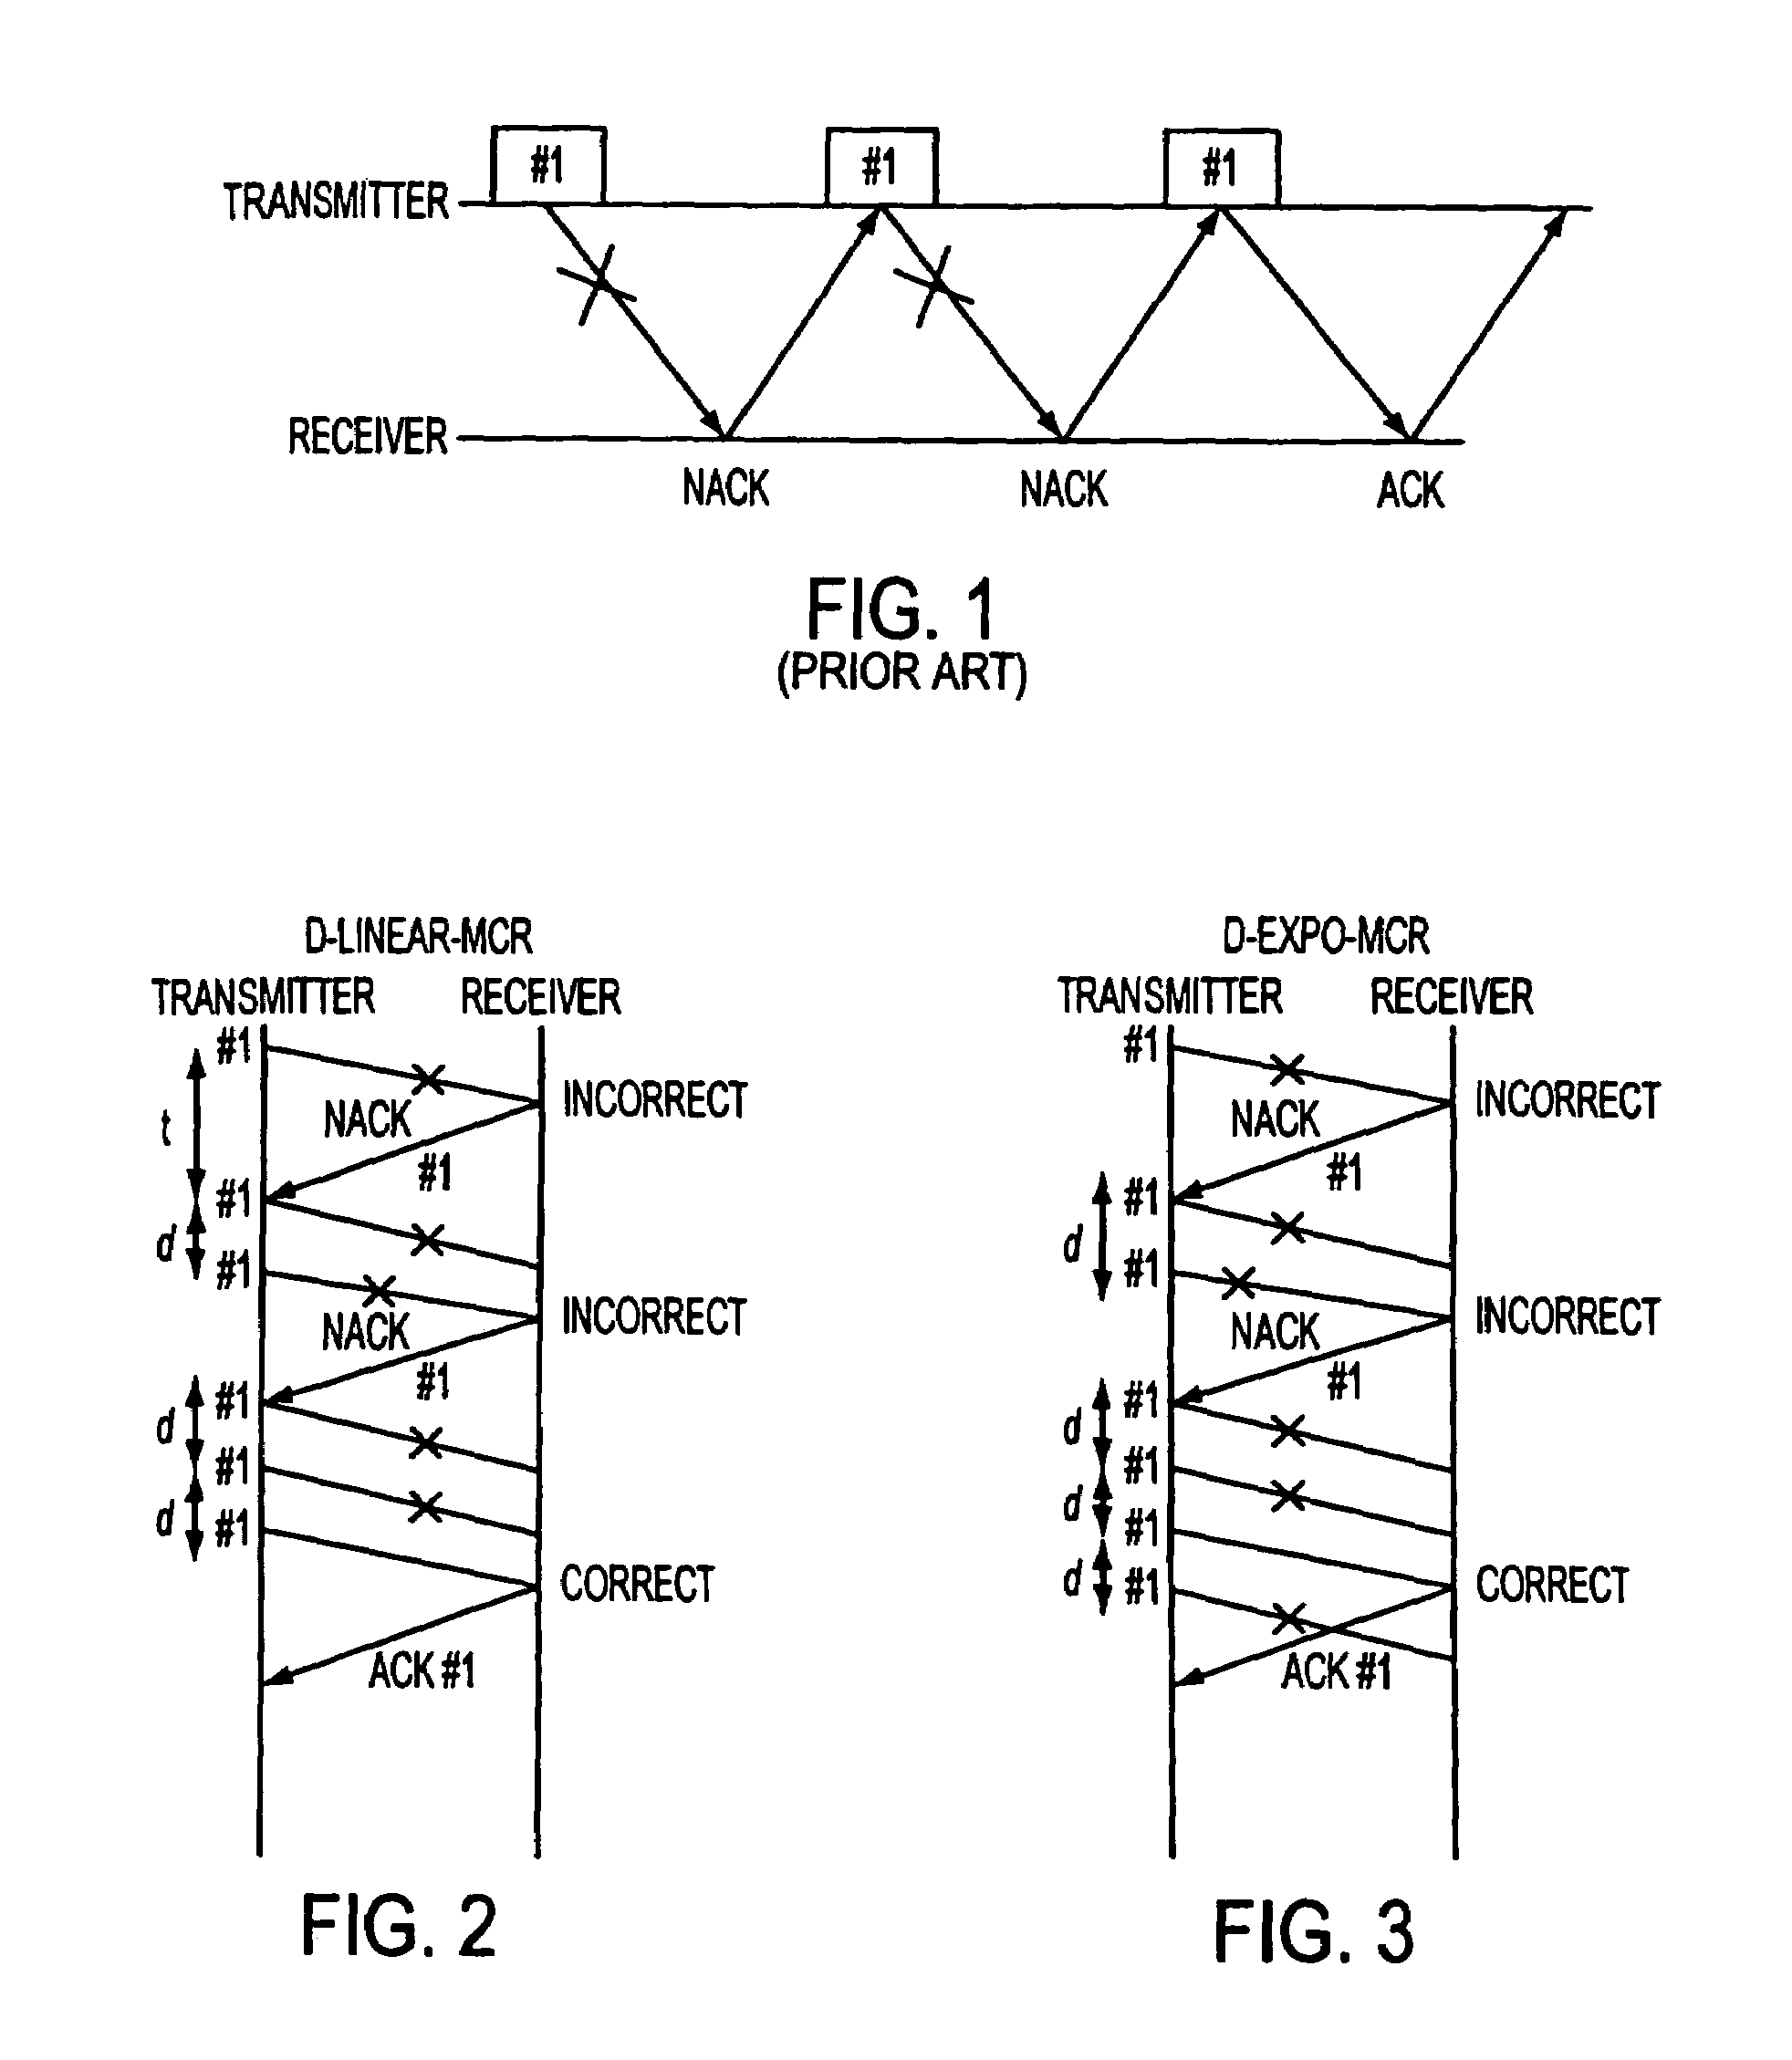 Method for retransmission of lost packet in fading channels